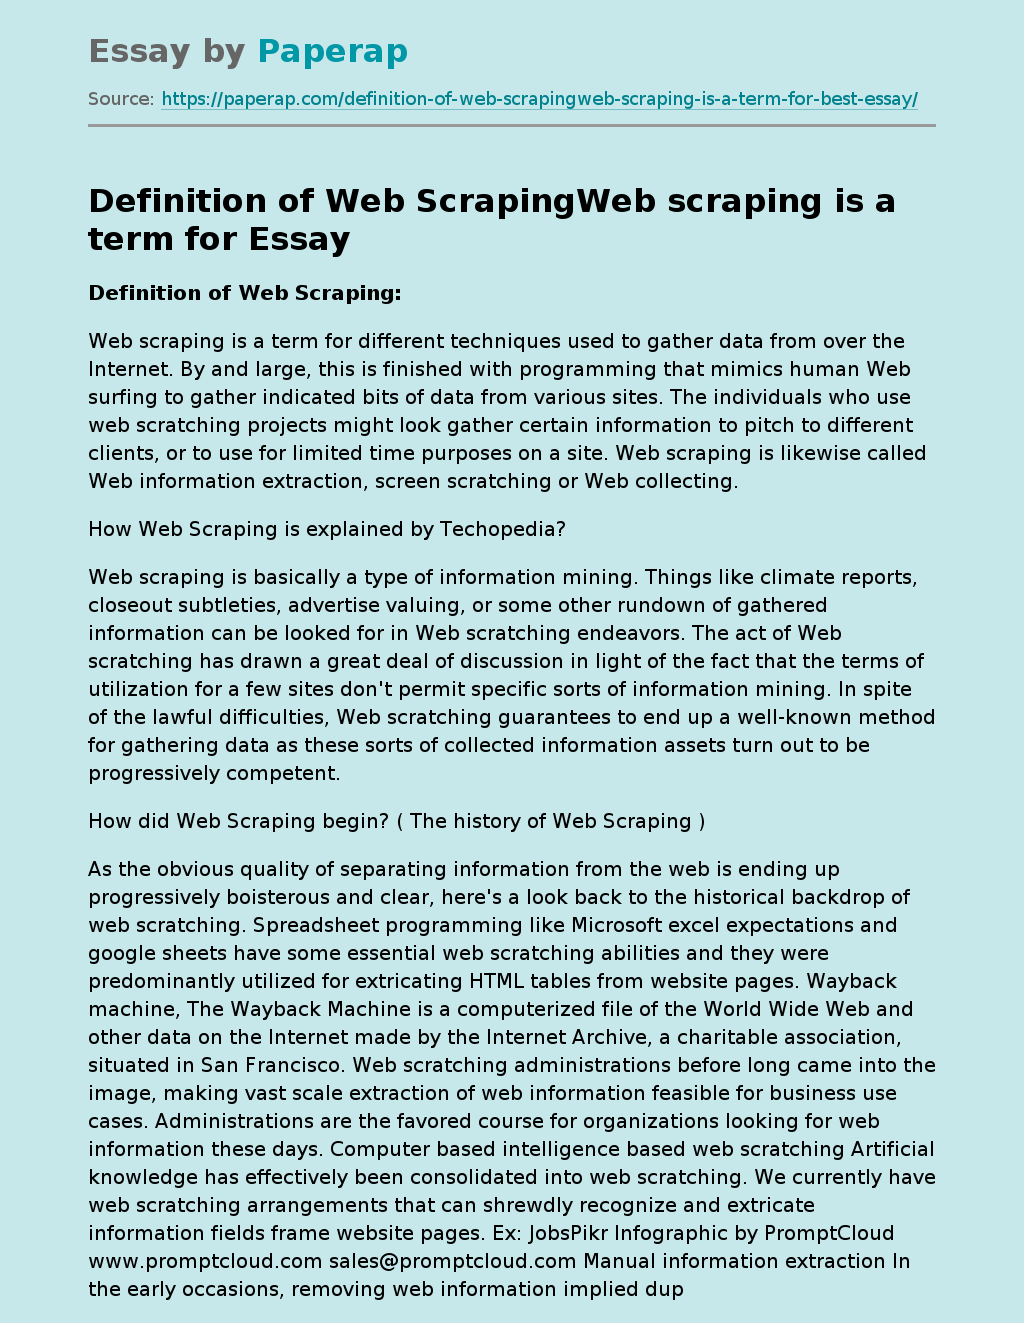 Definition of Web ScrapingWeb scraping is a term for